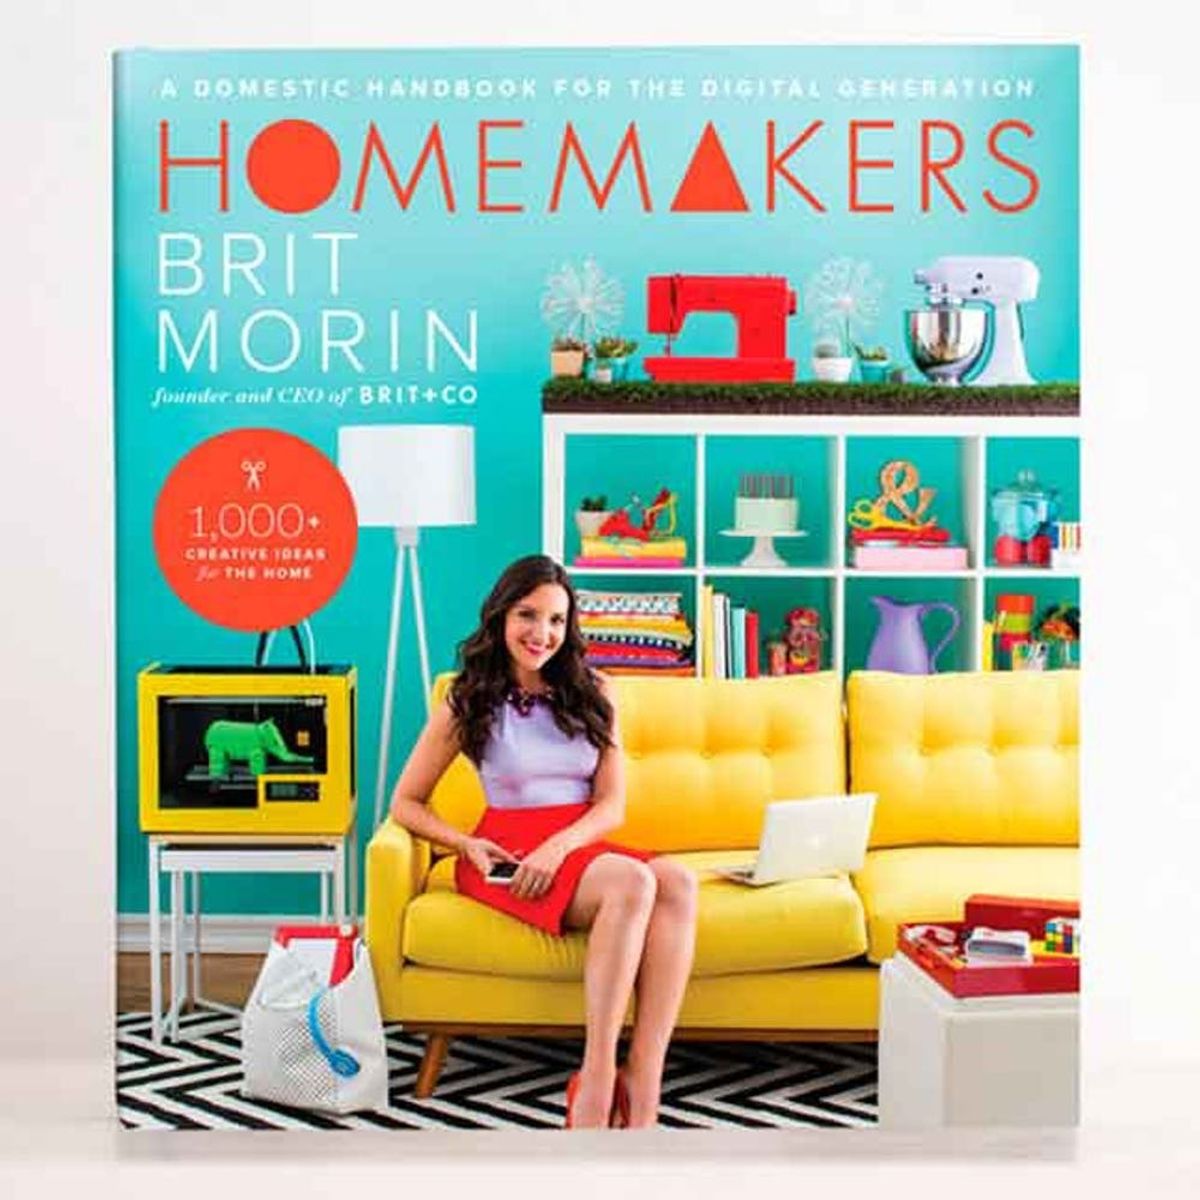 Pre-Order Homemakers + Get Tons of Cool FREE Stuff!